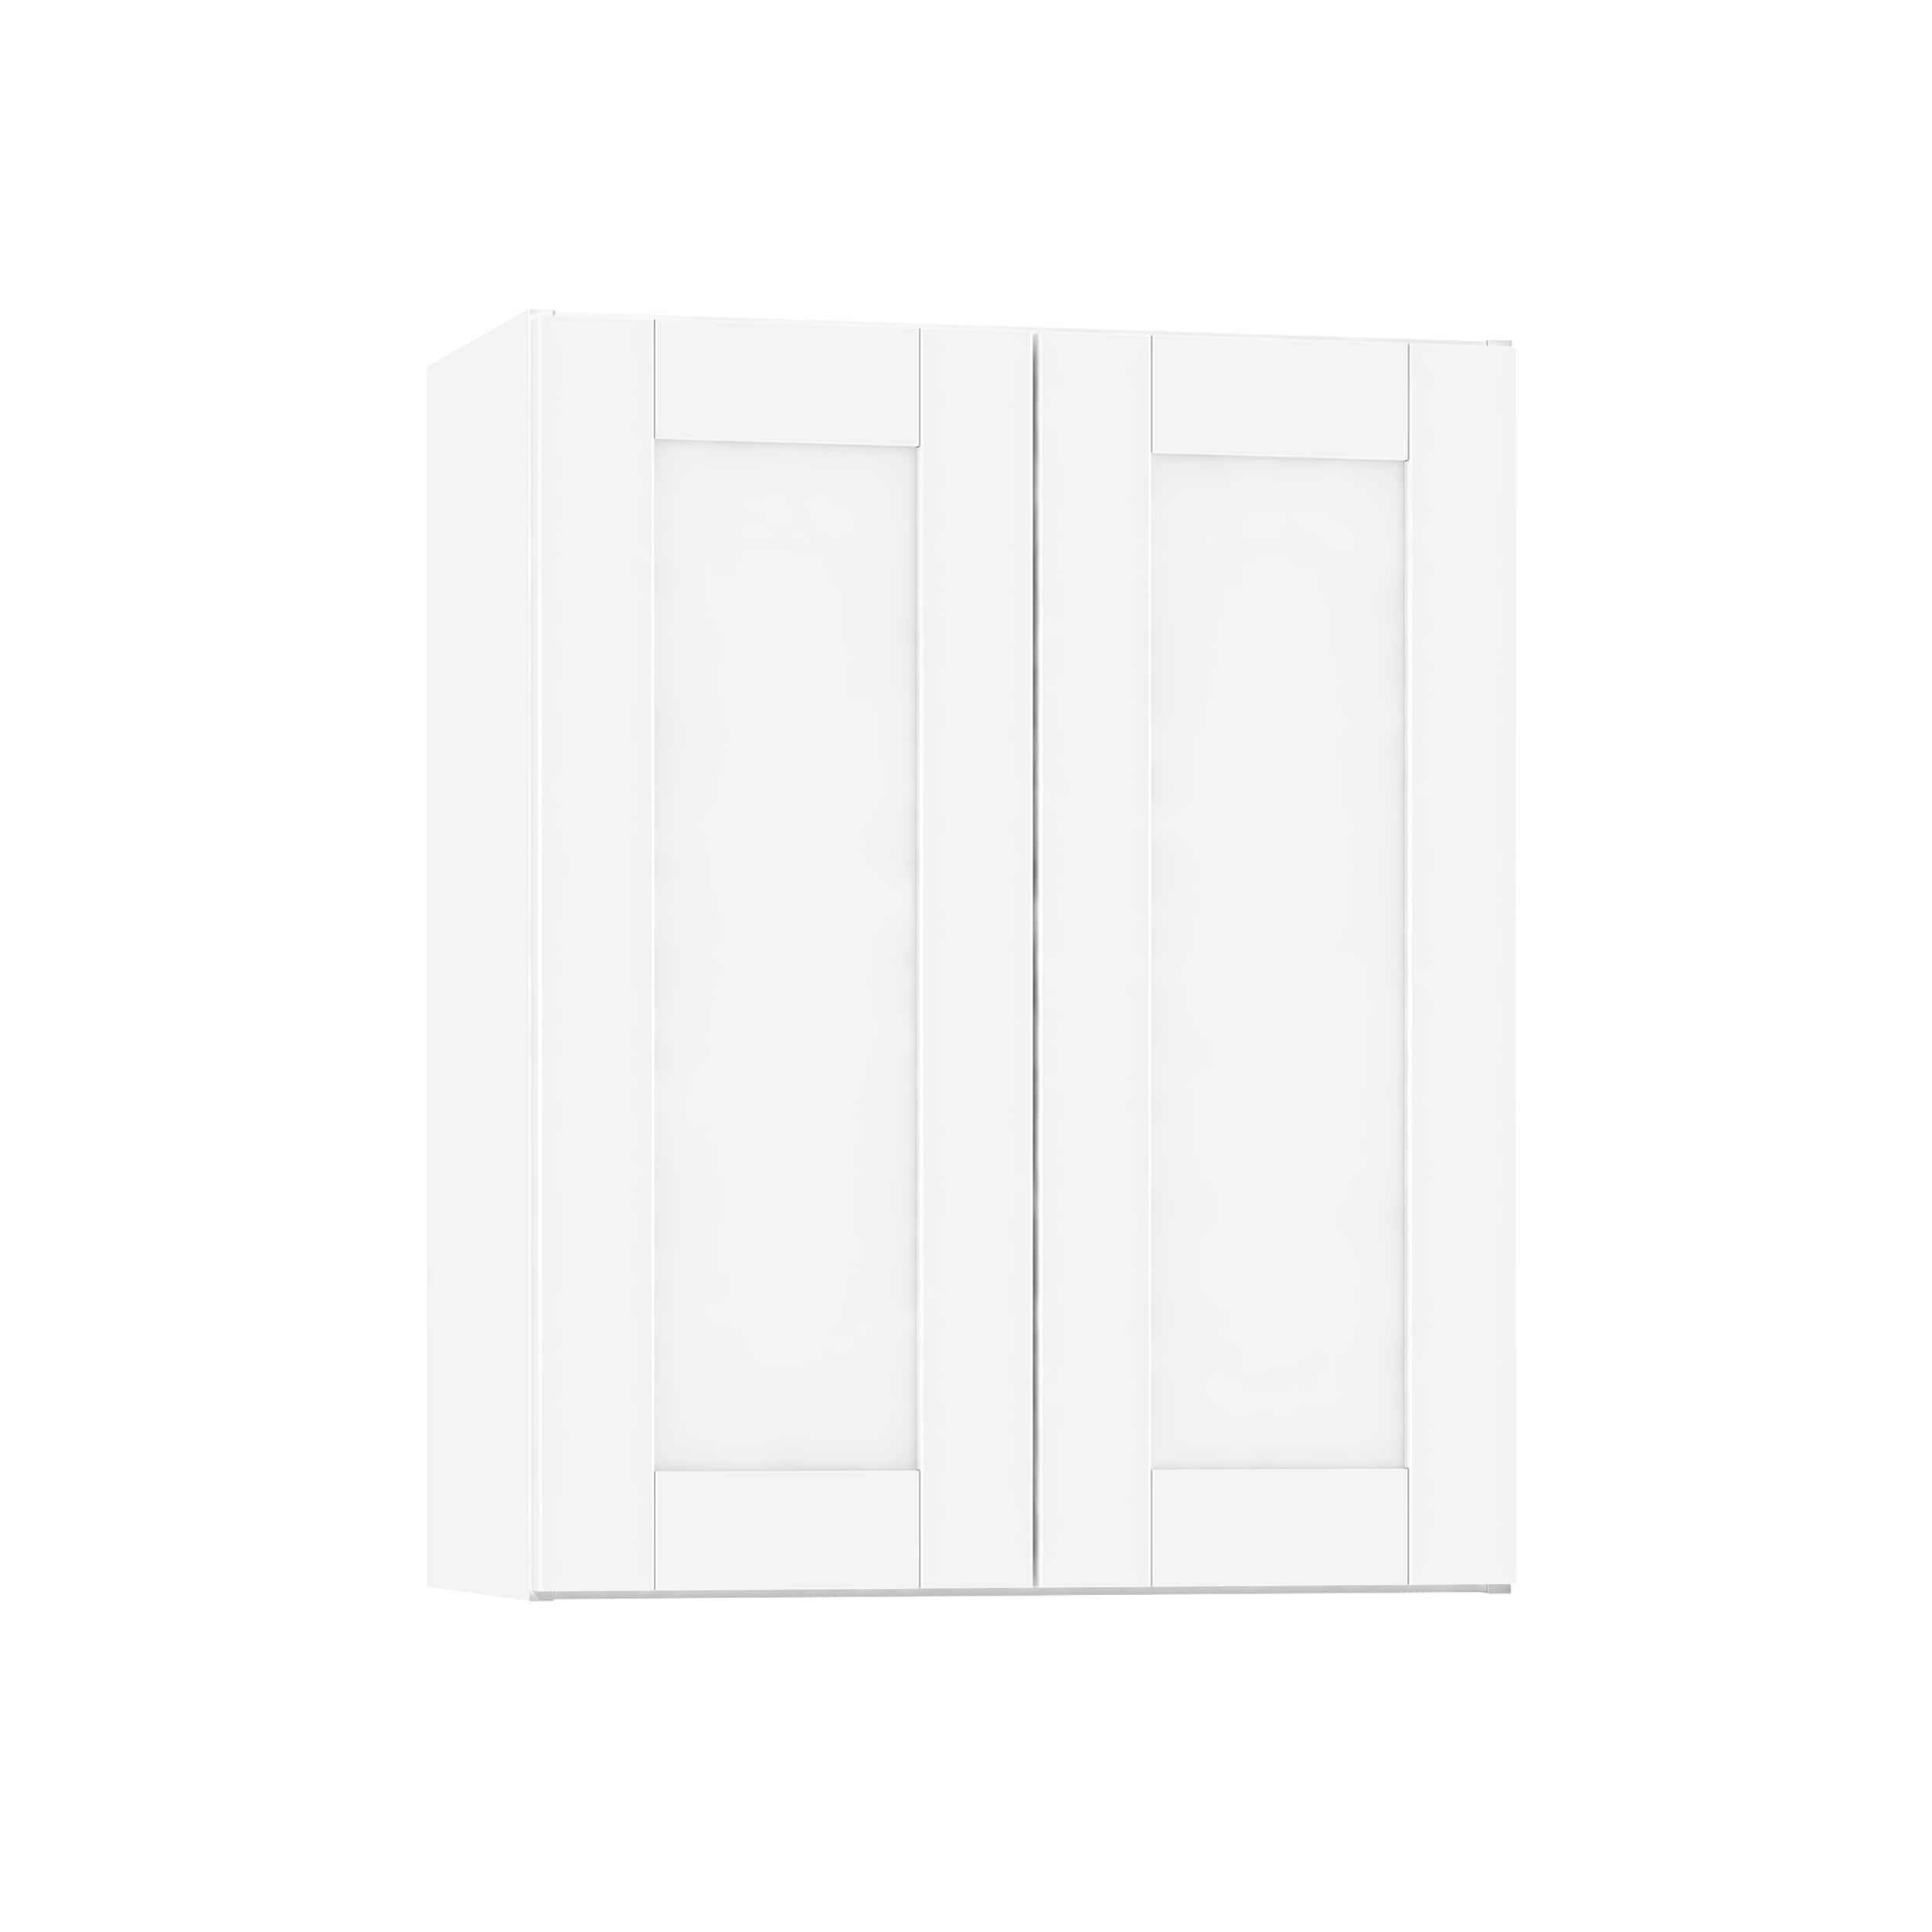 Hugo&Borg Canora 24-in W x 30-in H x 12.75-in D Canora White Door Wall ...